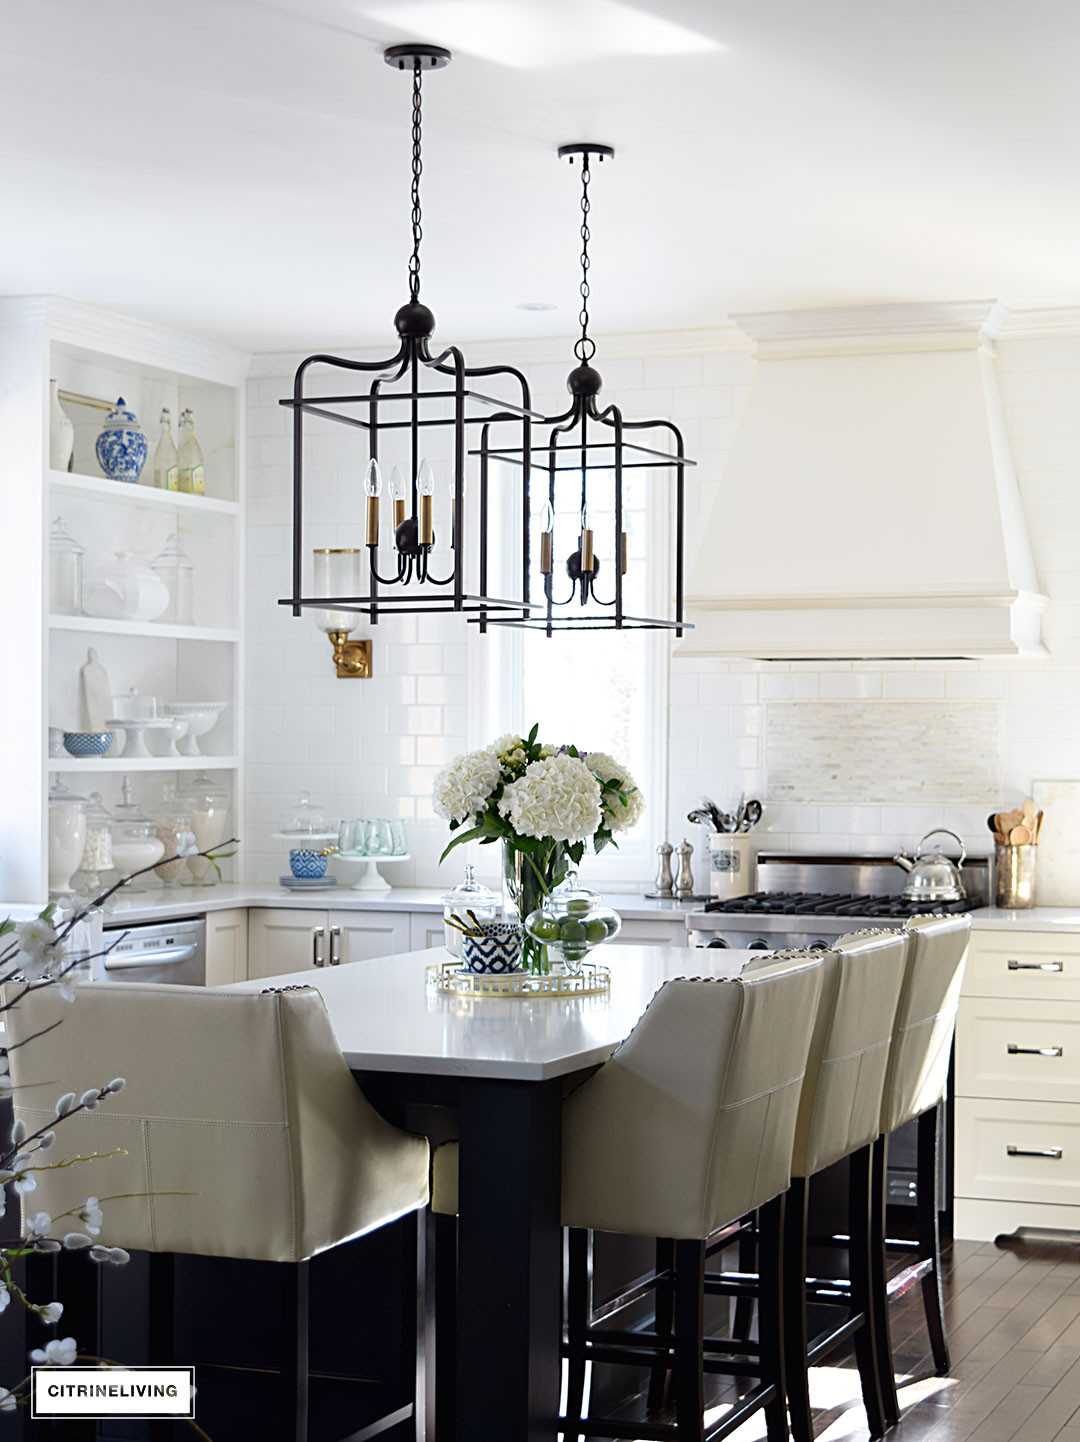 Kitchen Pendant Lights Over Island
 CITRINELIVING SPRING IN FULL SWING HOME TOUR 2017